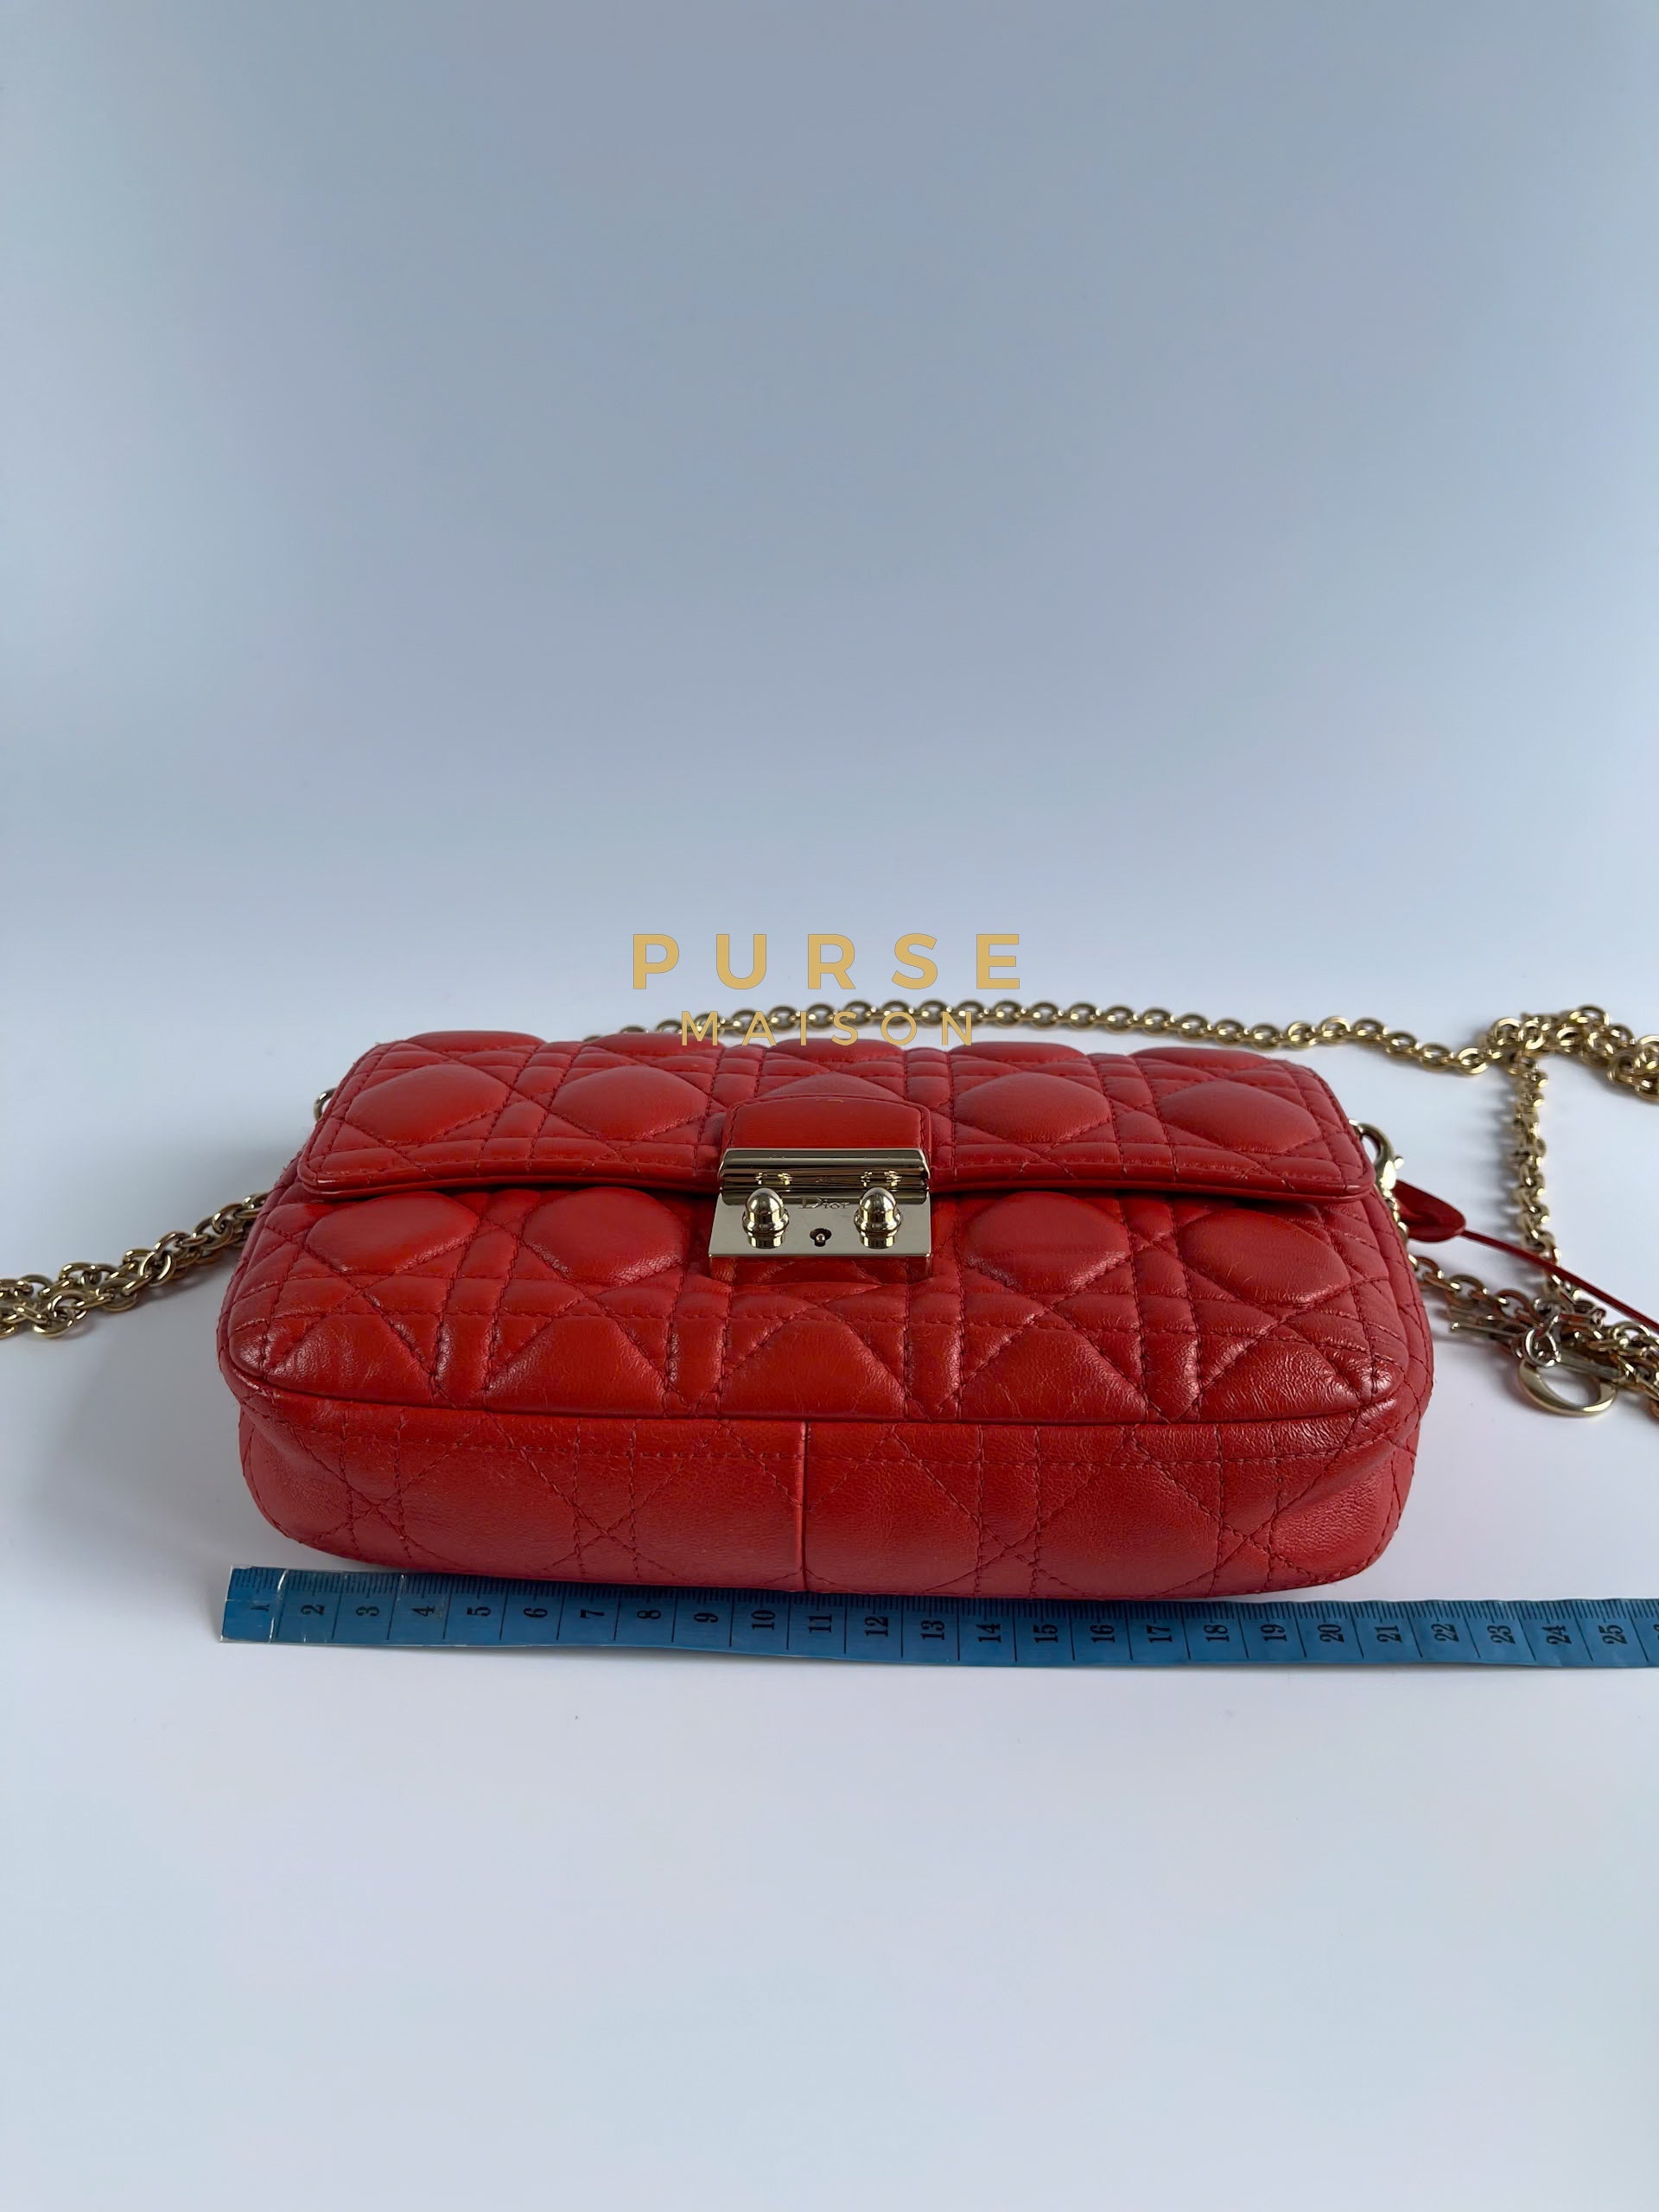 Miss Dior Promenade Bag in Red Cannage Quilt Lambskin | Purse Maison Luxury Bags Shop